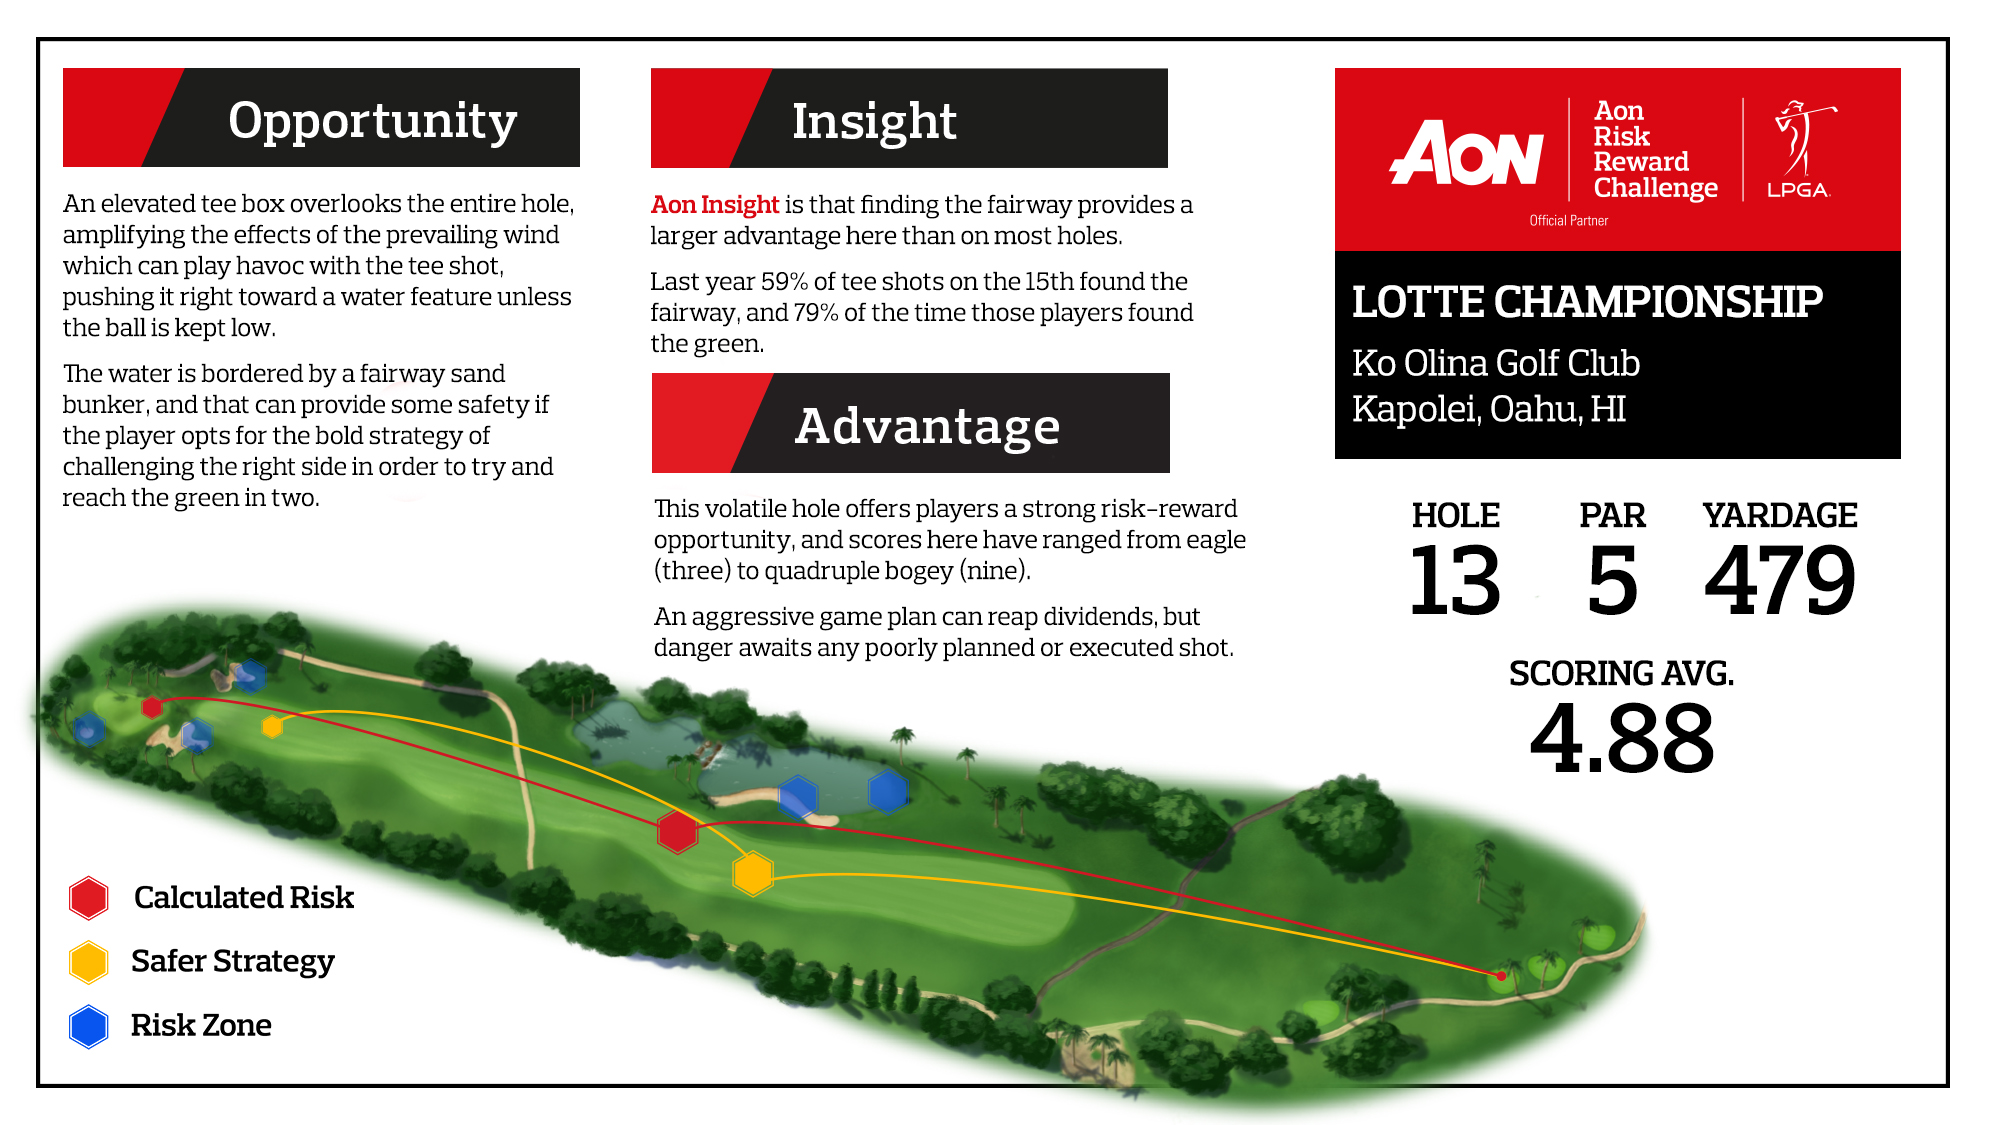 This week focuses on the par-5, 13th hole at Ko Olina Golf Club. An aggressive game plan can reap dividends, but danger awaits any poorly planned or executed shots.